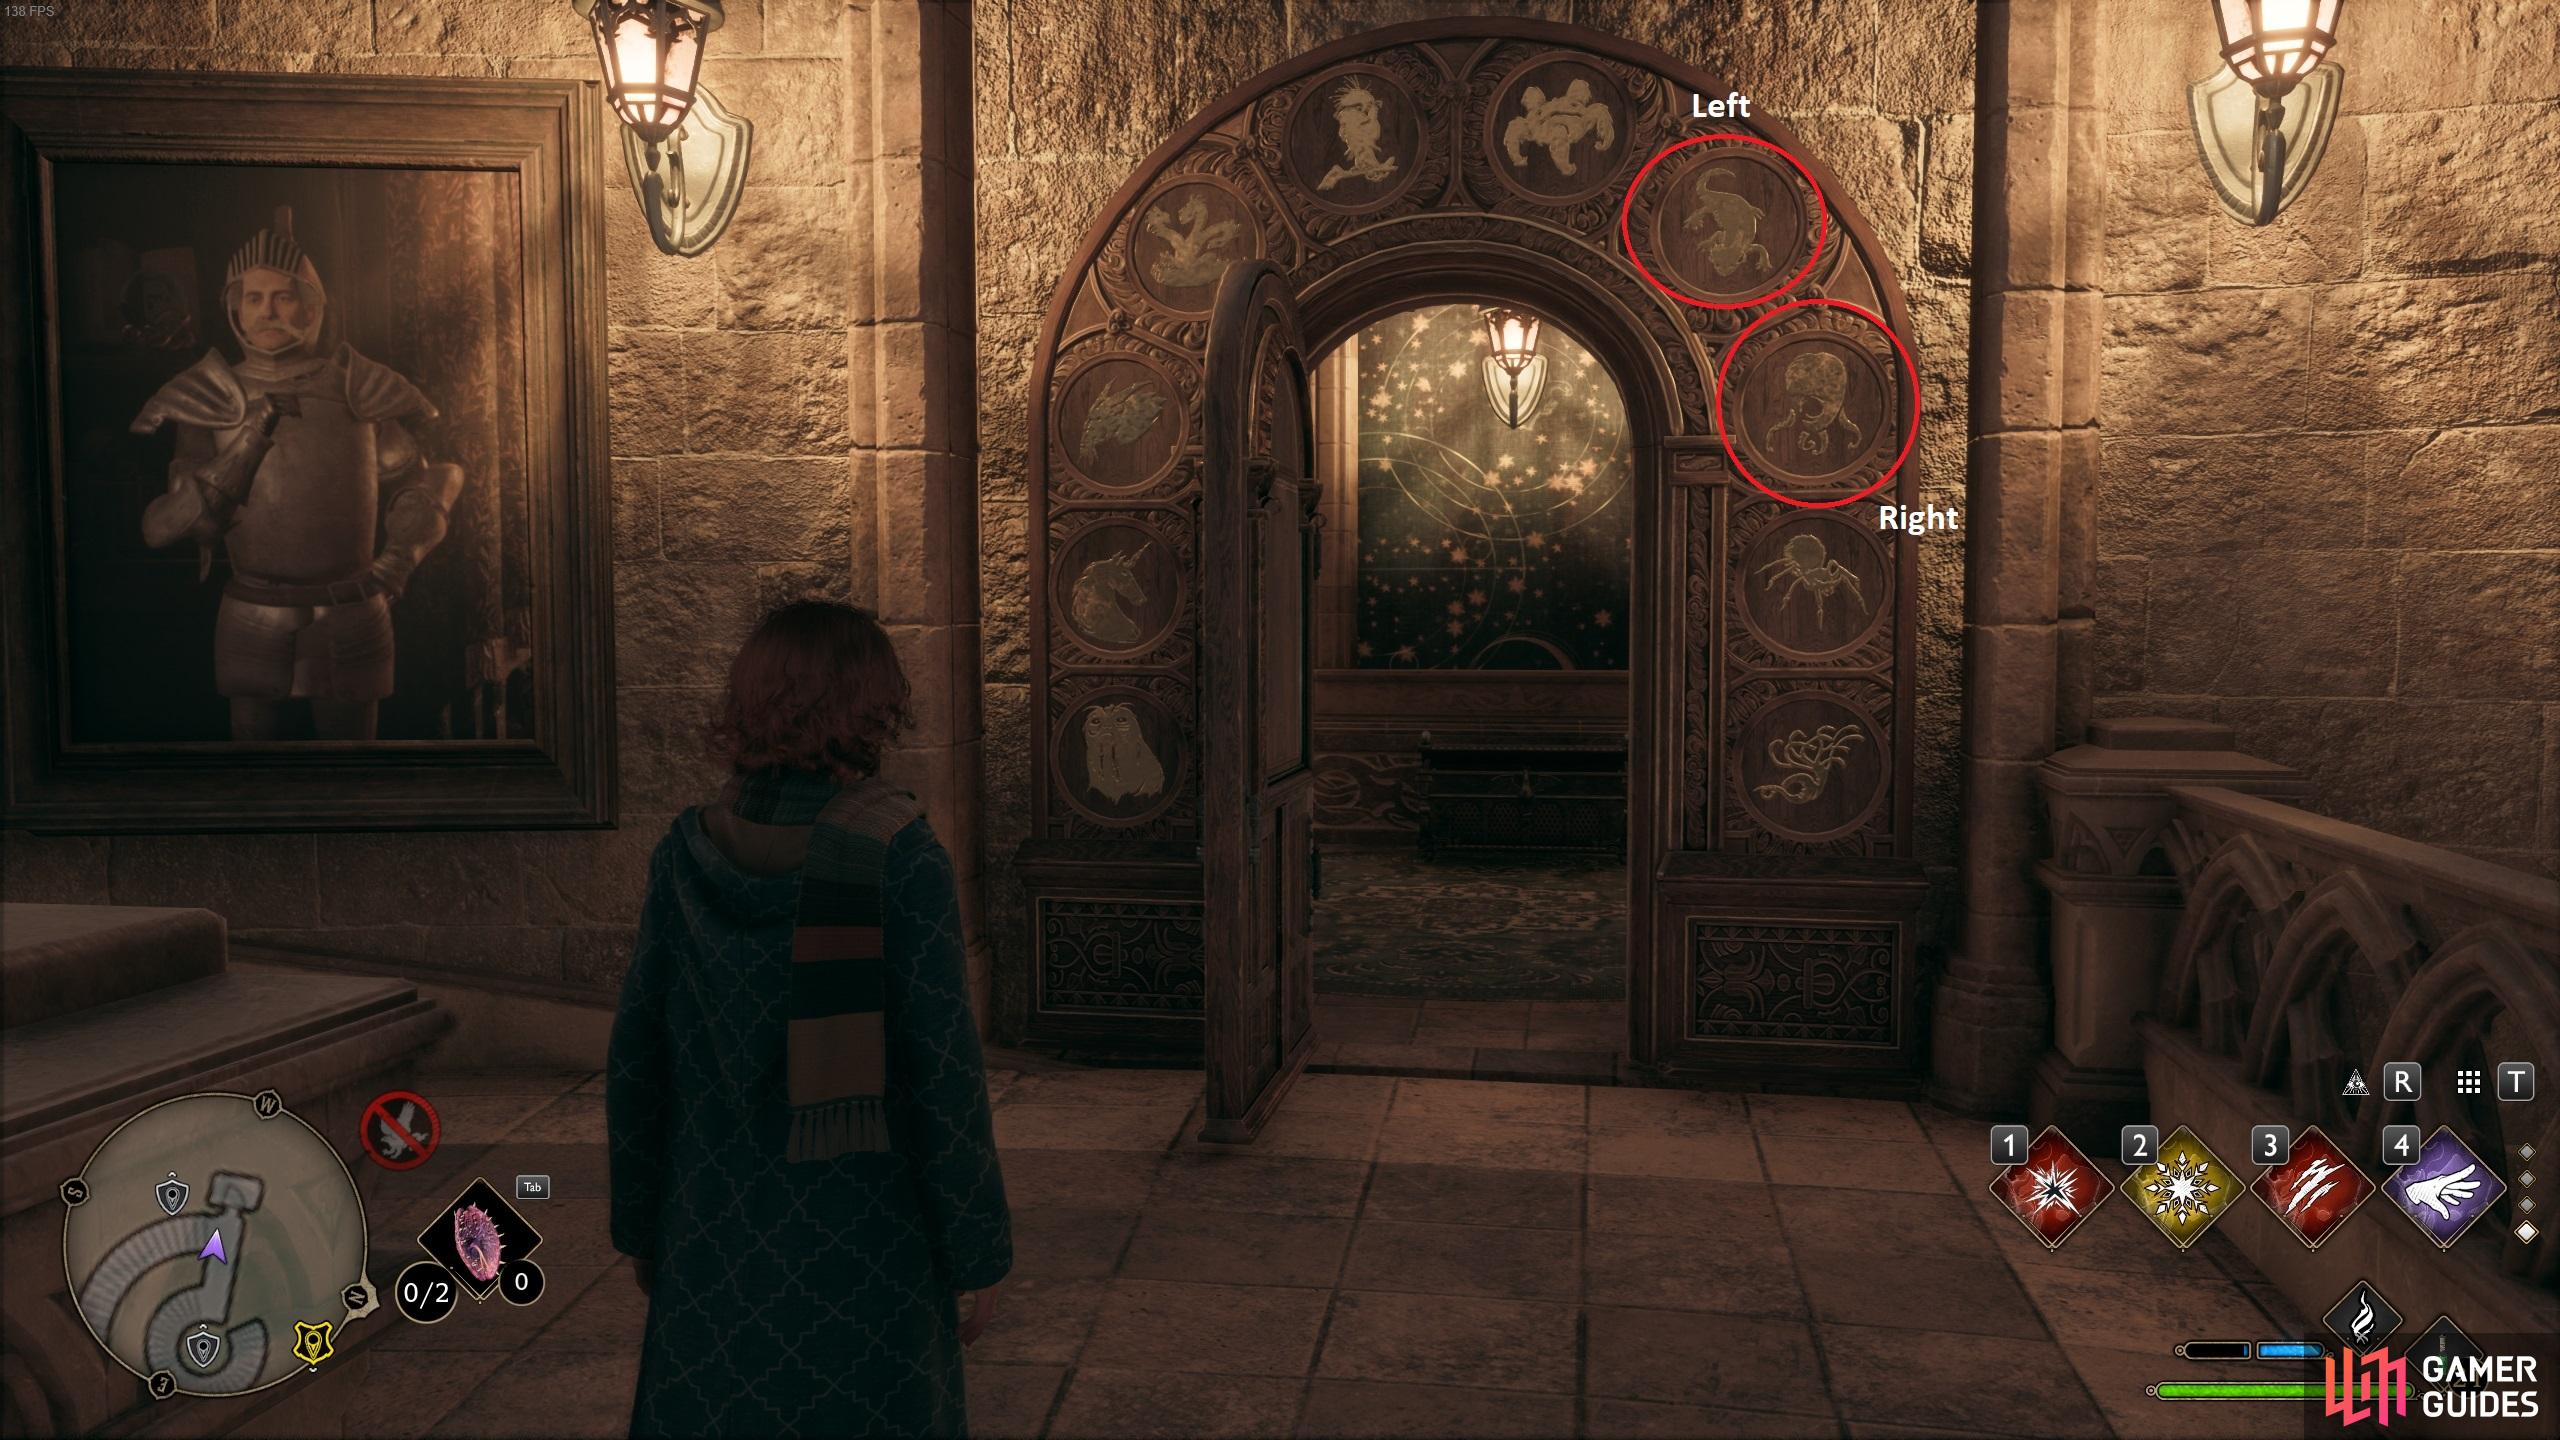 The answer to the door puzzle. The "Right" symbol in this instance is located directly opposite the door.